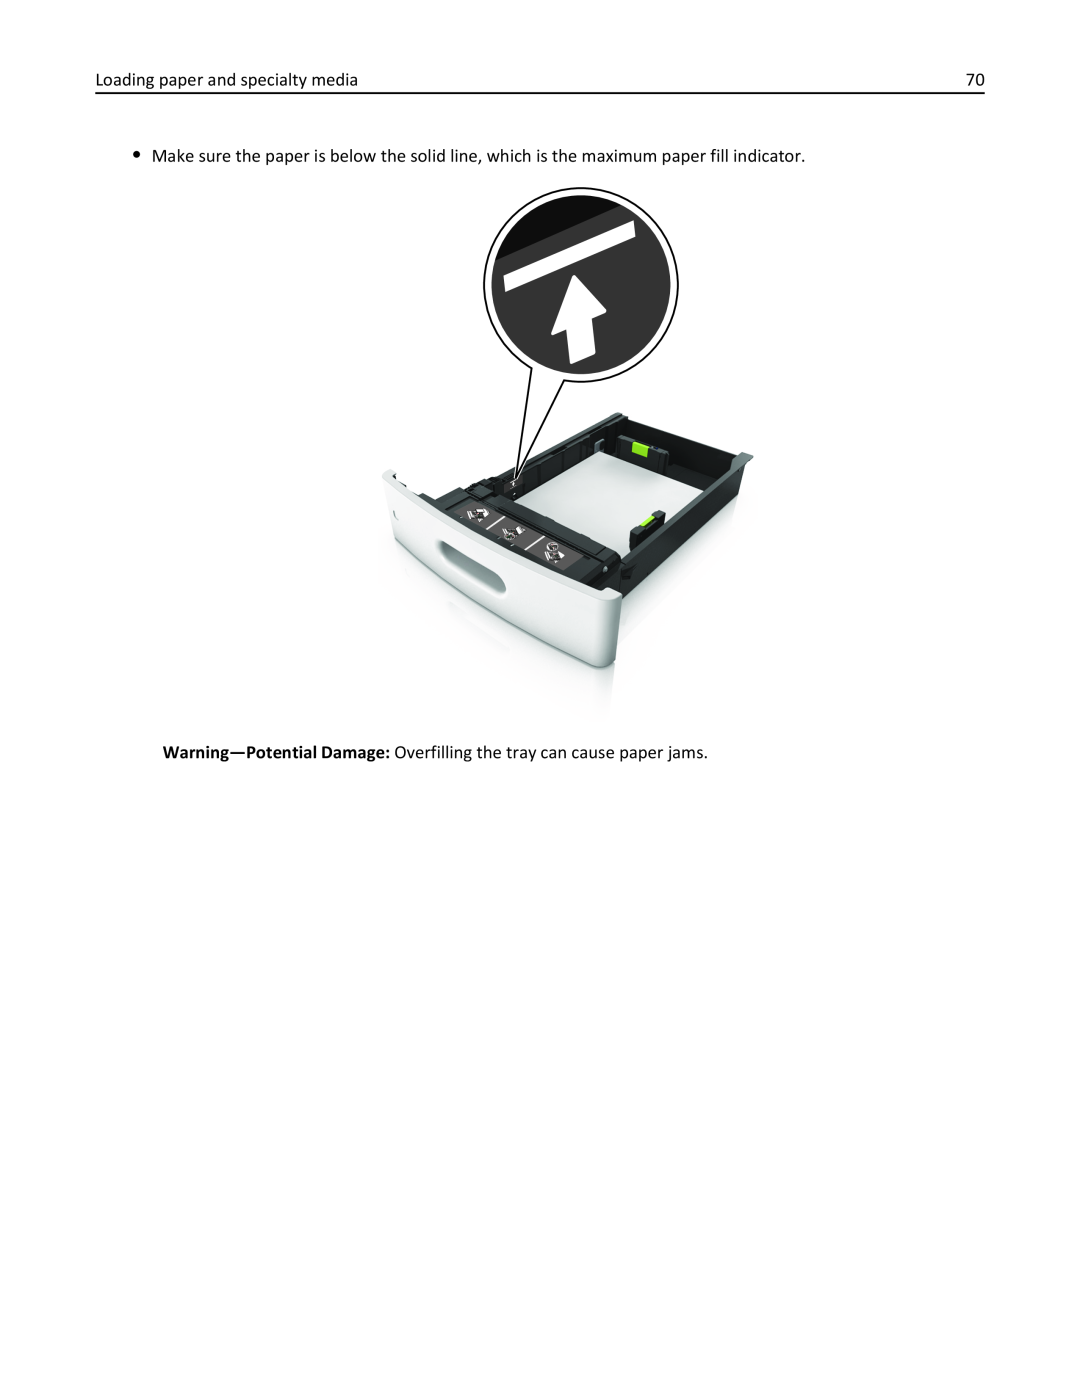 Lexmark MX710DHE Loading paper and specialty media, Warning-Potential Damage Overfilling the tray can cause paper jams 